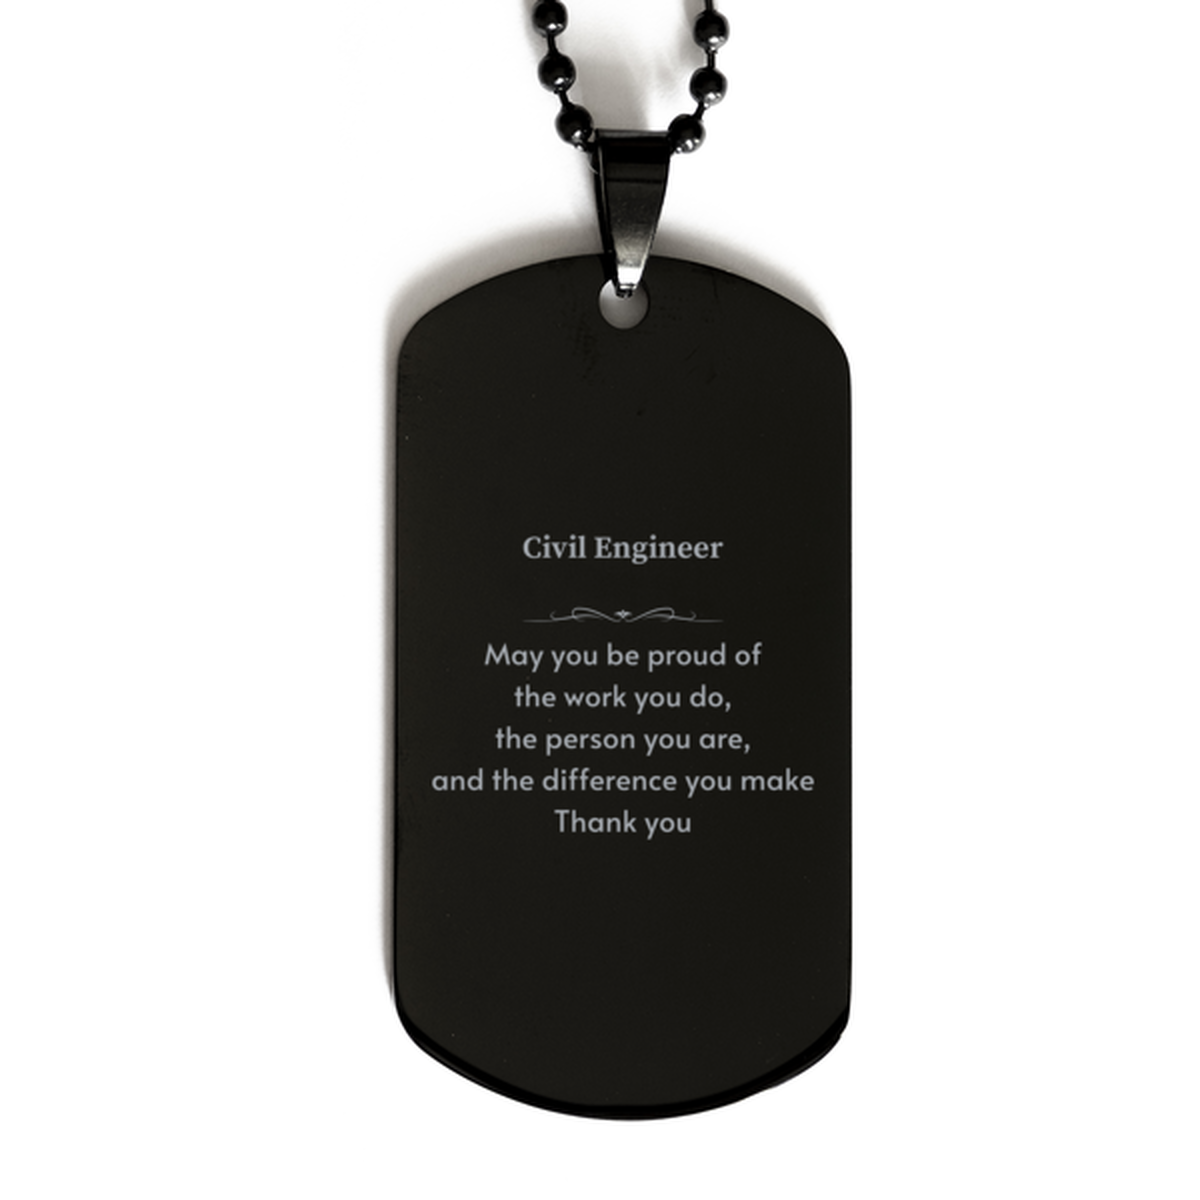 Heartwarming Black Dog Tag Retirement Coworkers Gifts for Civil Engineer, Civil Engineer May You be proud of the work you do, the person you are Gifts for Boss Men Women Friends